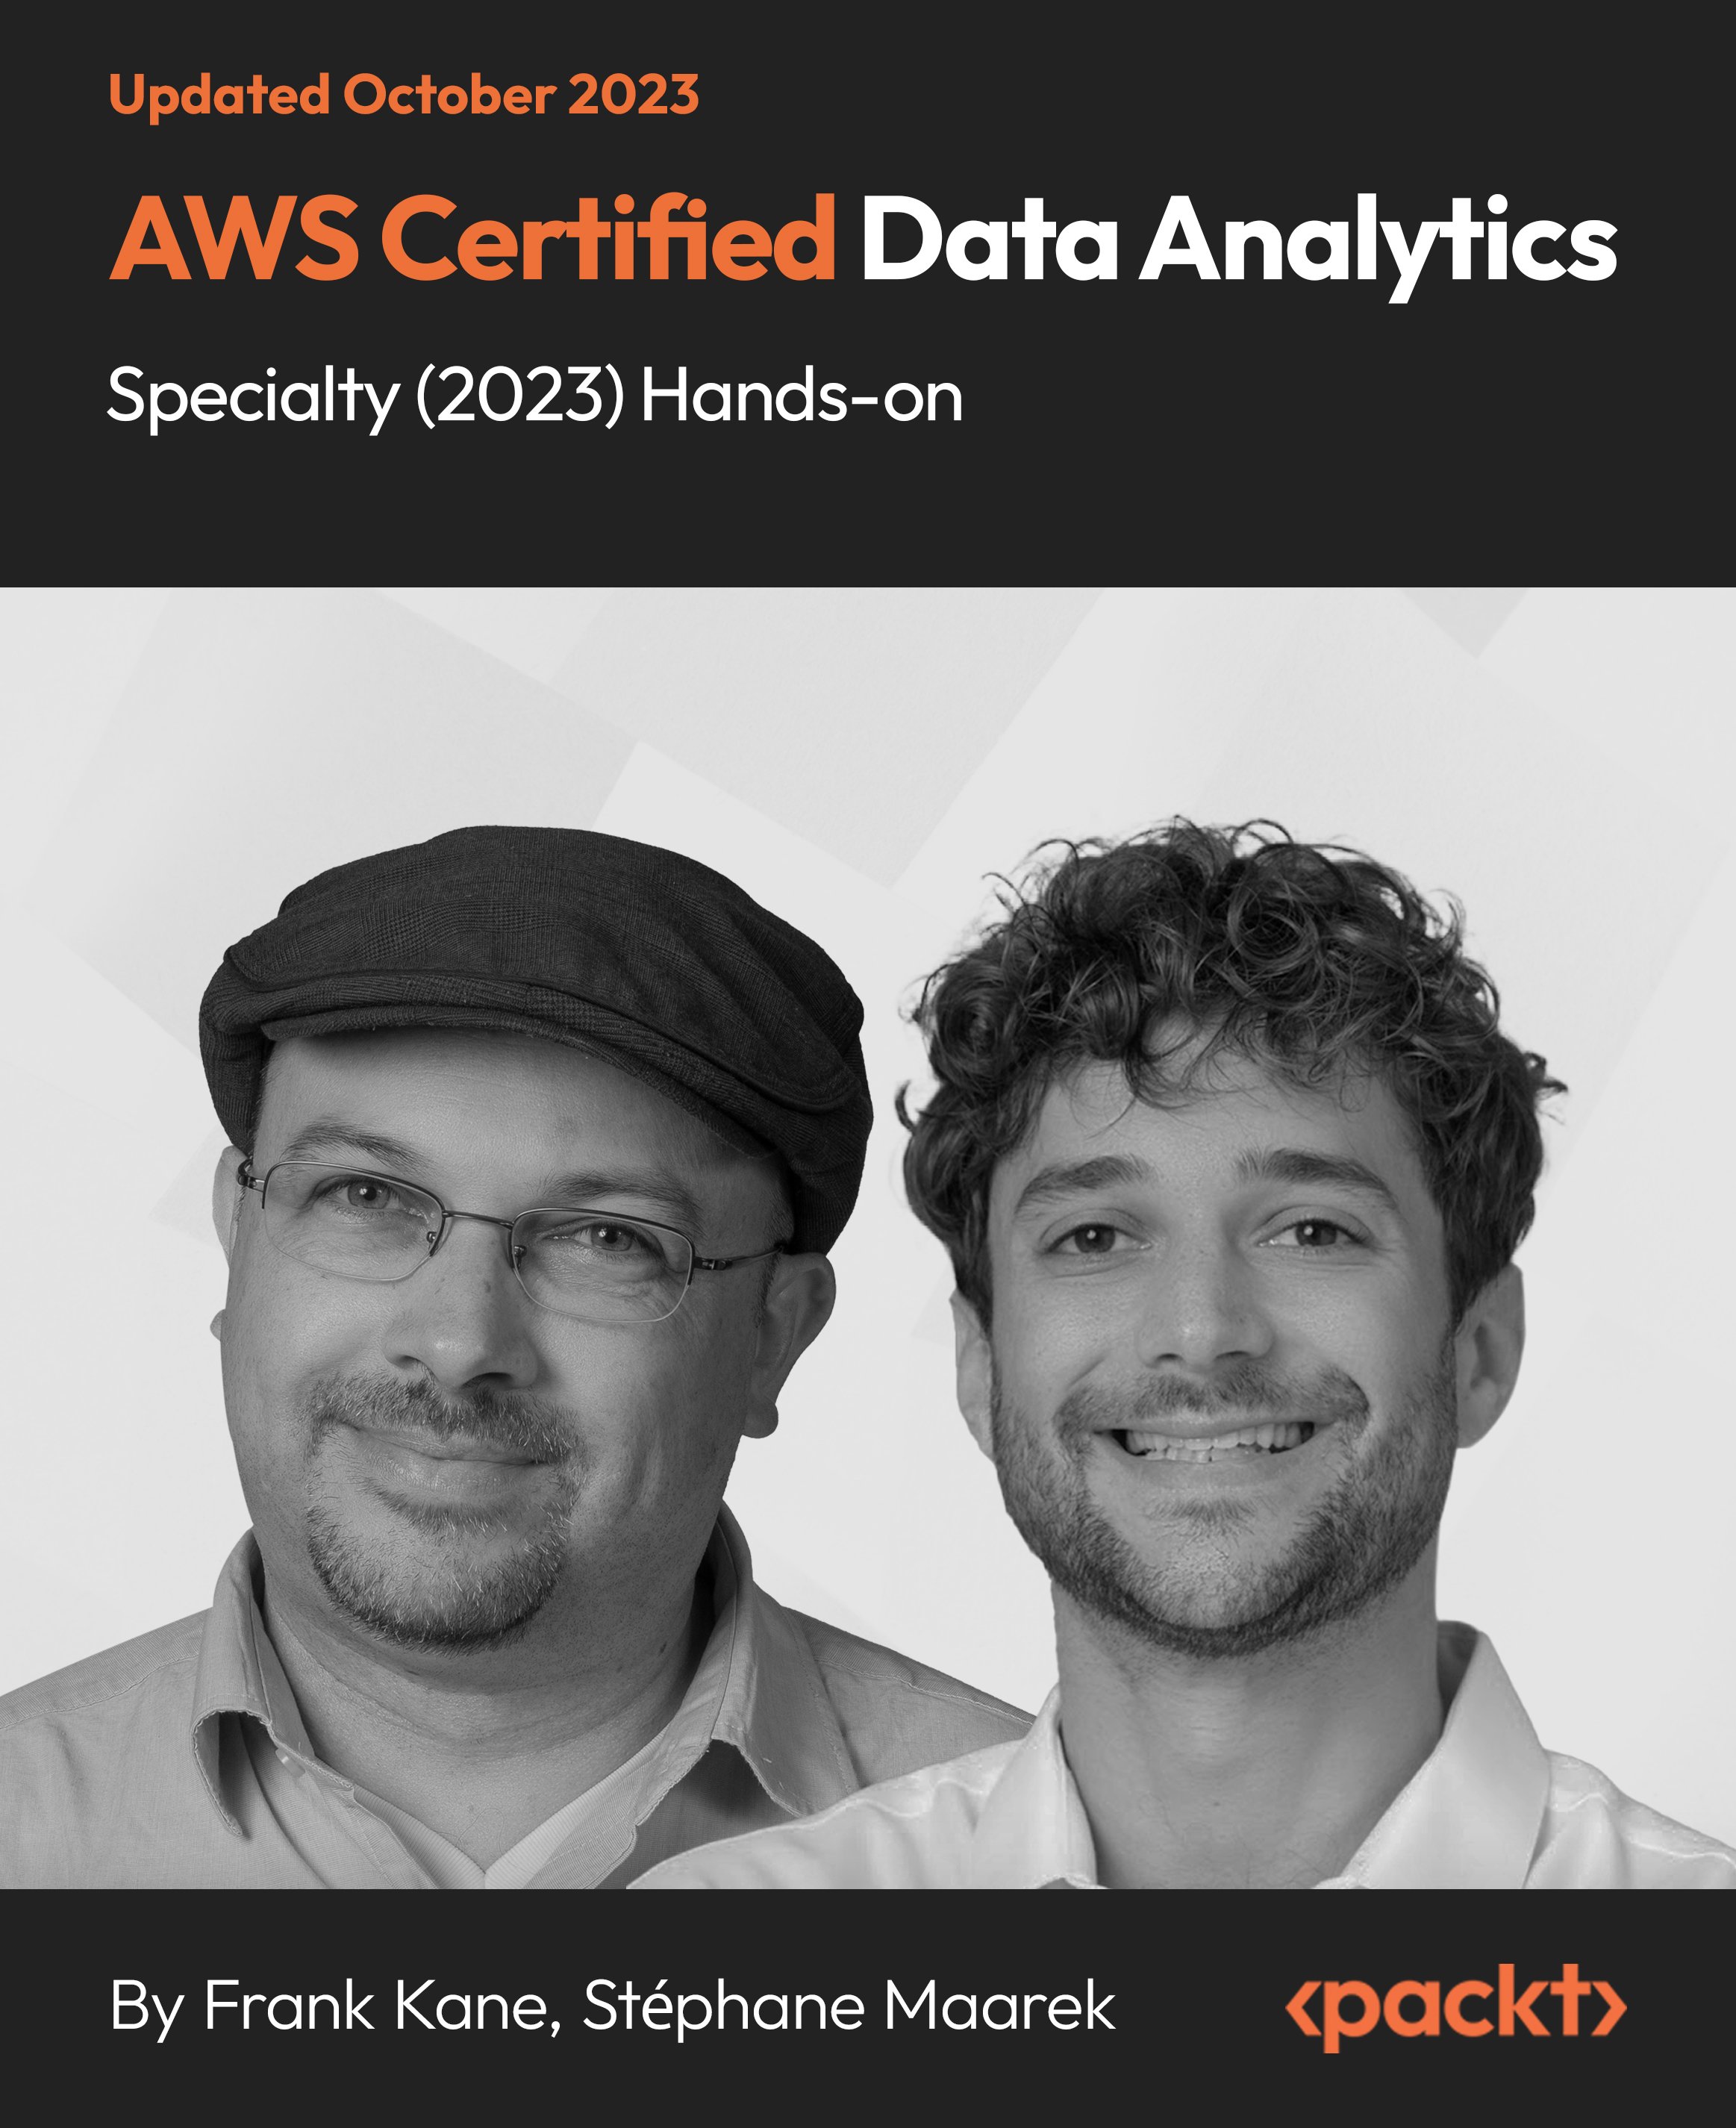 AWS Certified Data Analytics Specialty (2023) Hands-on